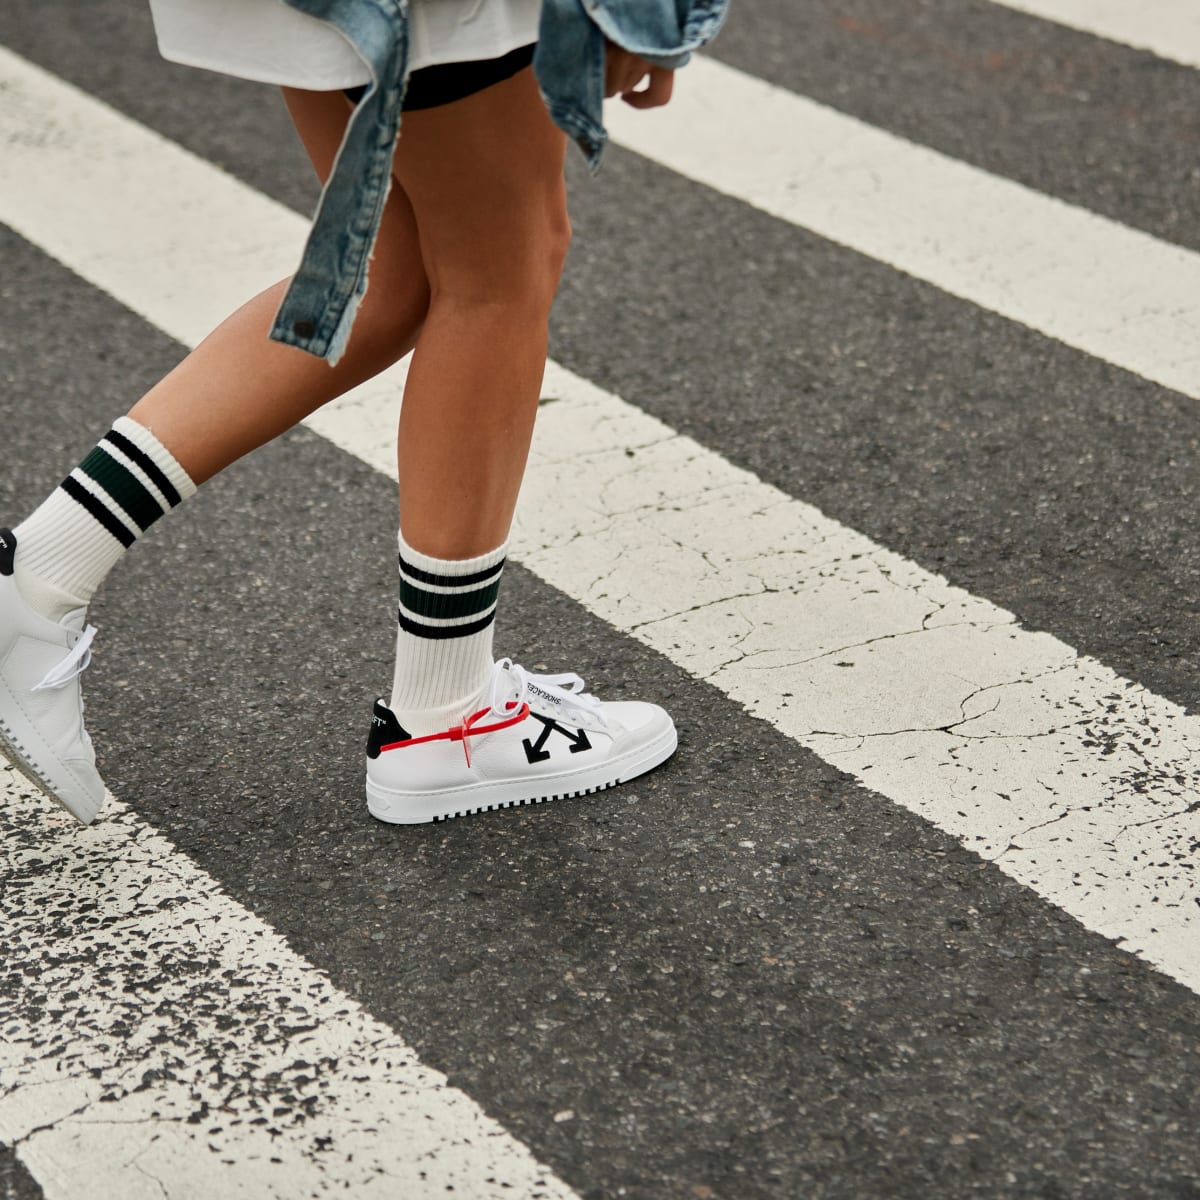 How Way We Shop Sneakers Has Changed Over the Past - Fashionista